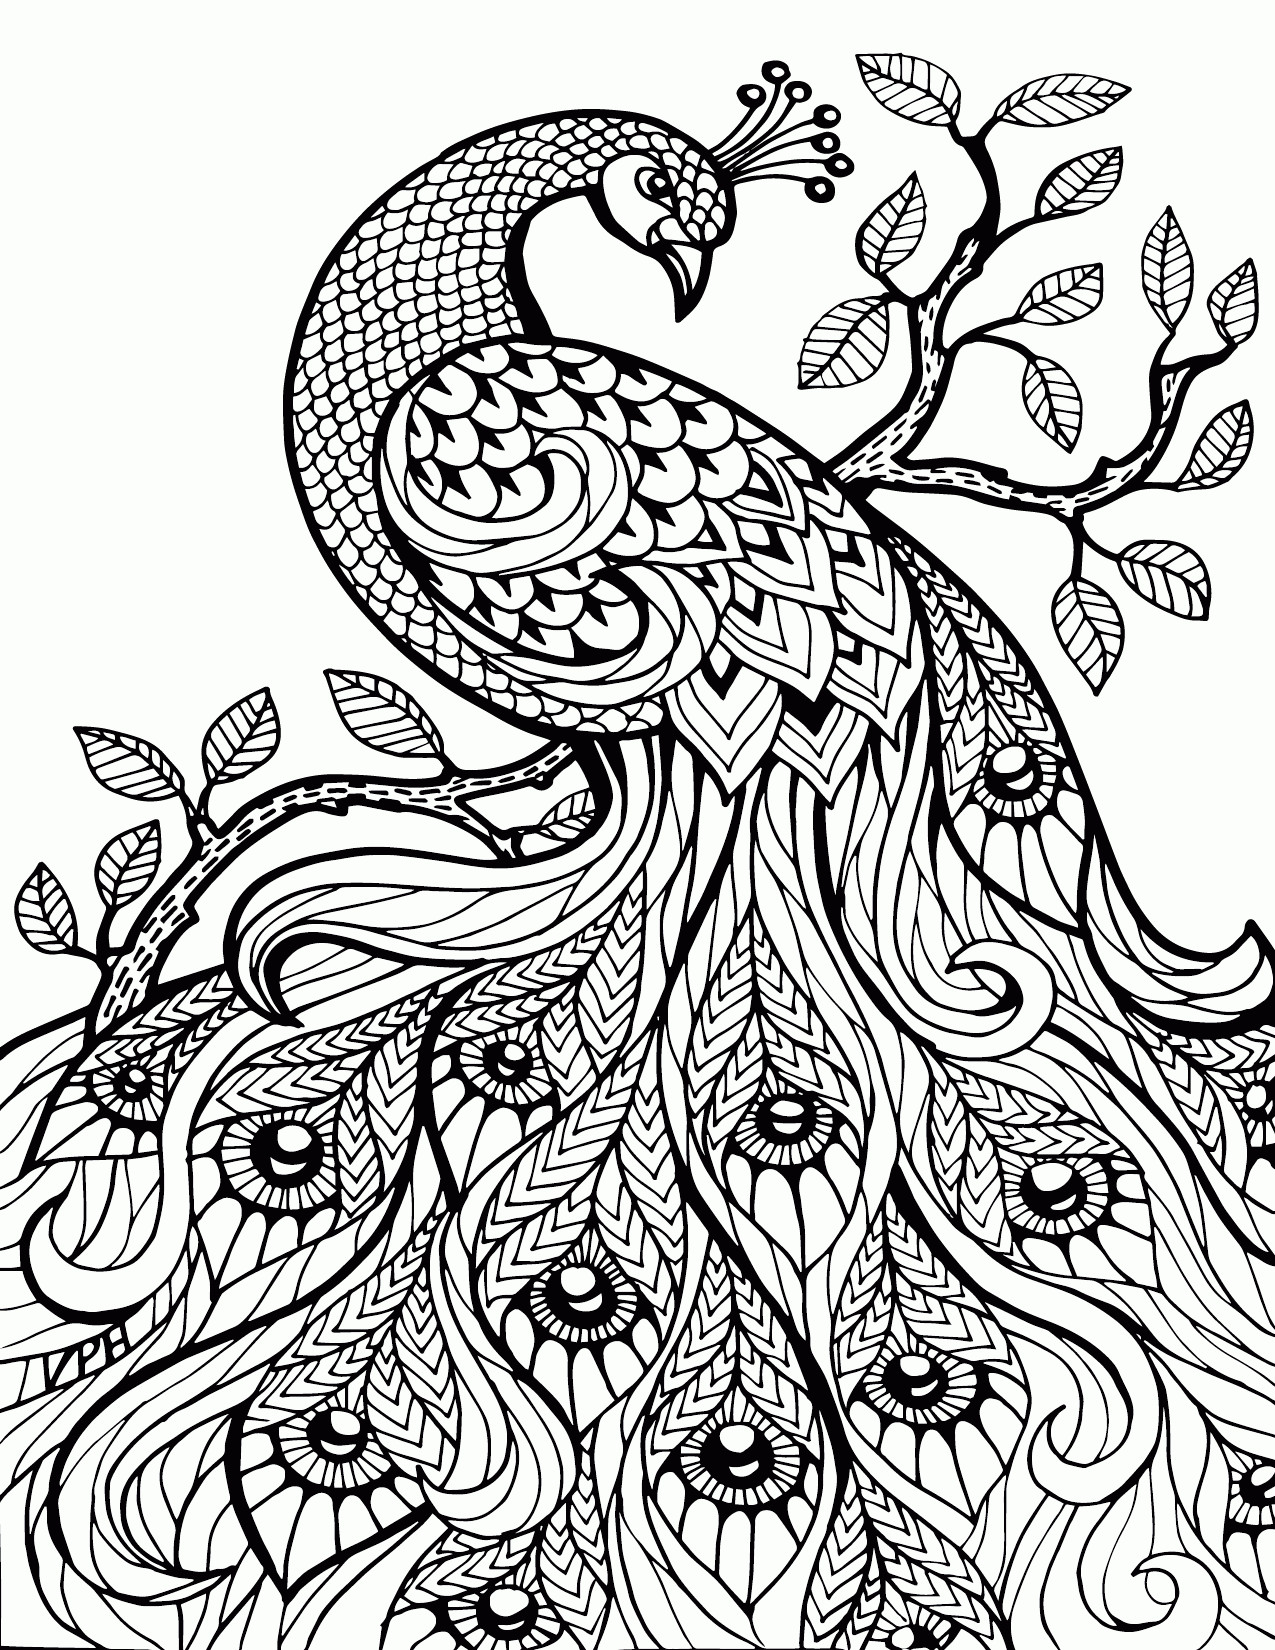 Stress Coloring Books For Adults
 Adult Stress Relief Coloring Pages Printable Coloring